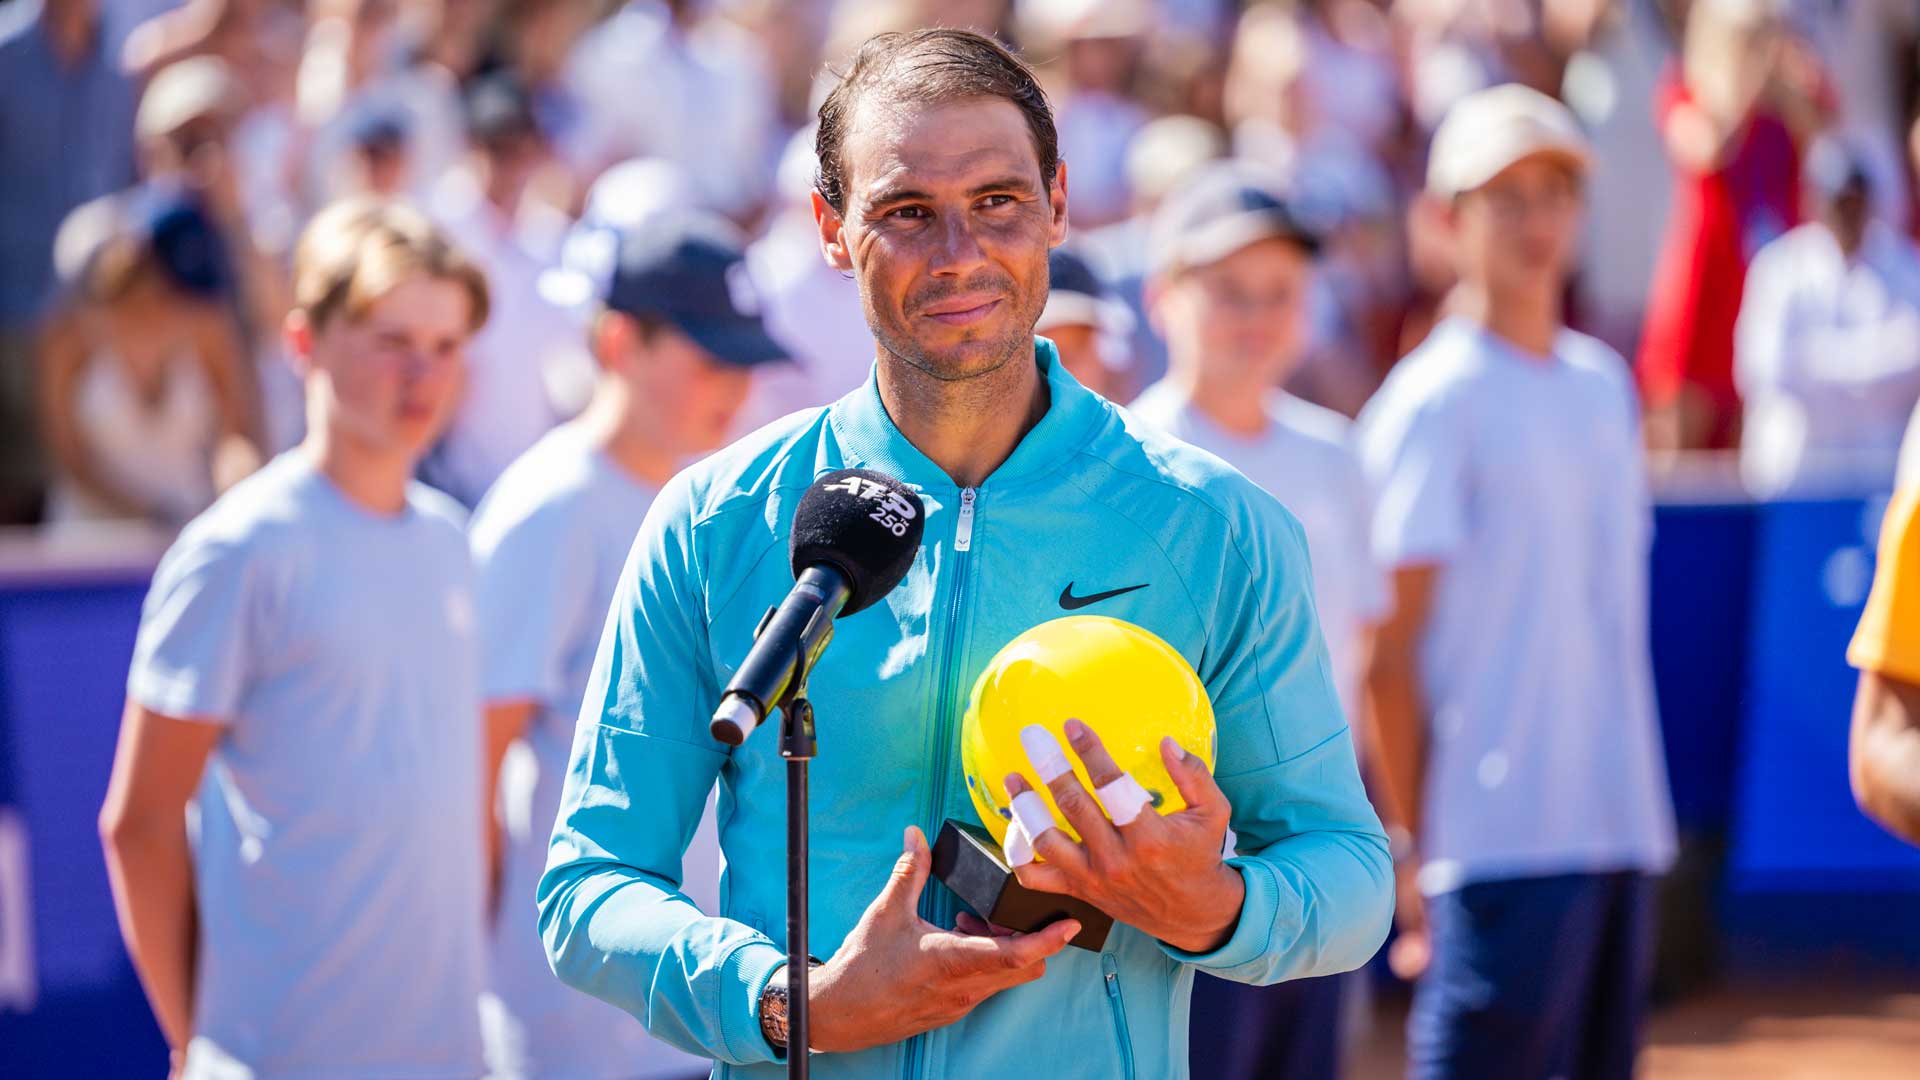 Just In: Nadal is not happy with Bastad level, but ‘no damage’ to body in marathon final run